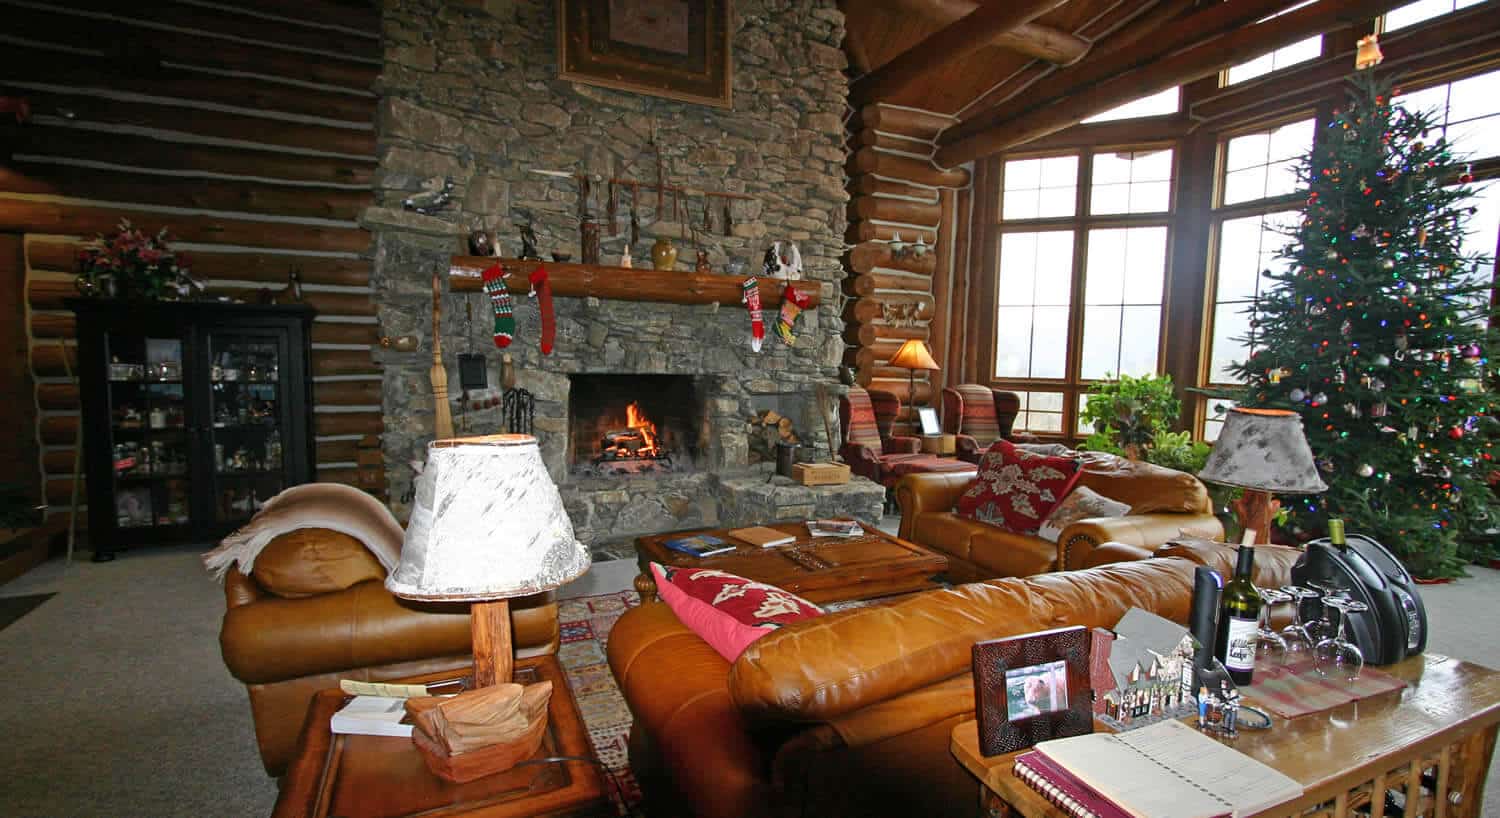 Living roomw ith large stone fireplace decorated for Christmas. 